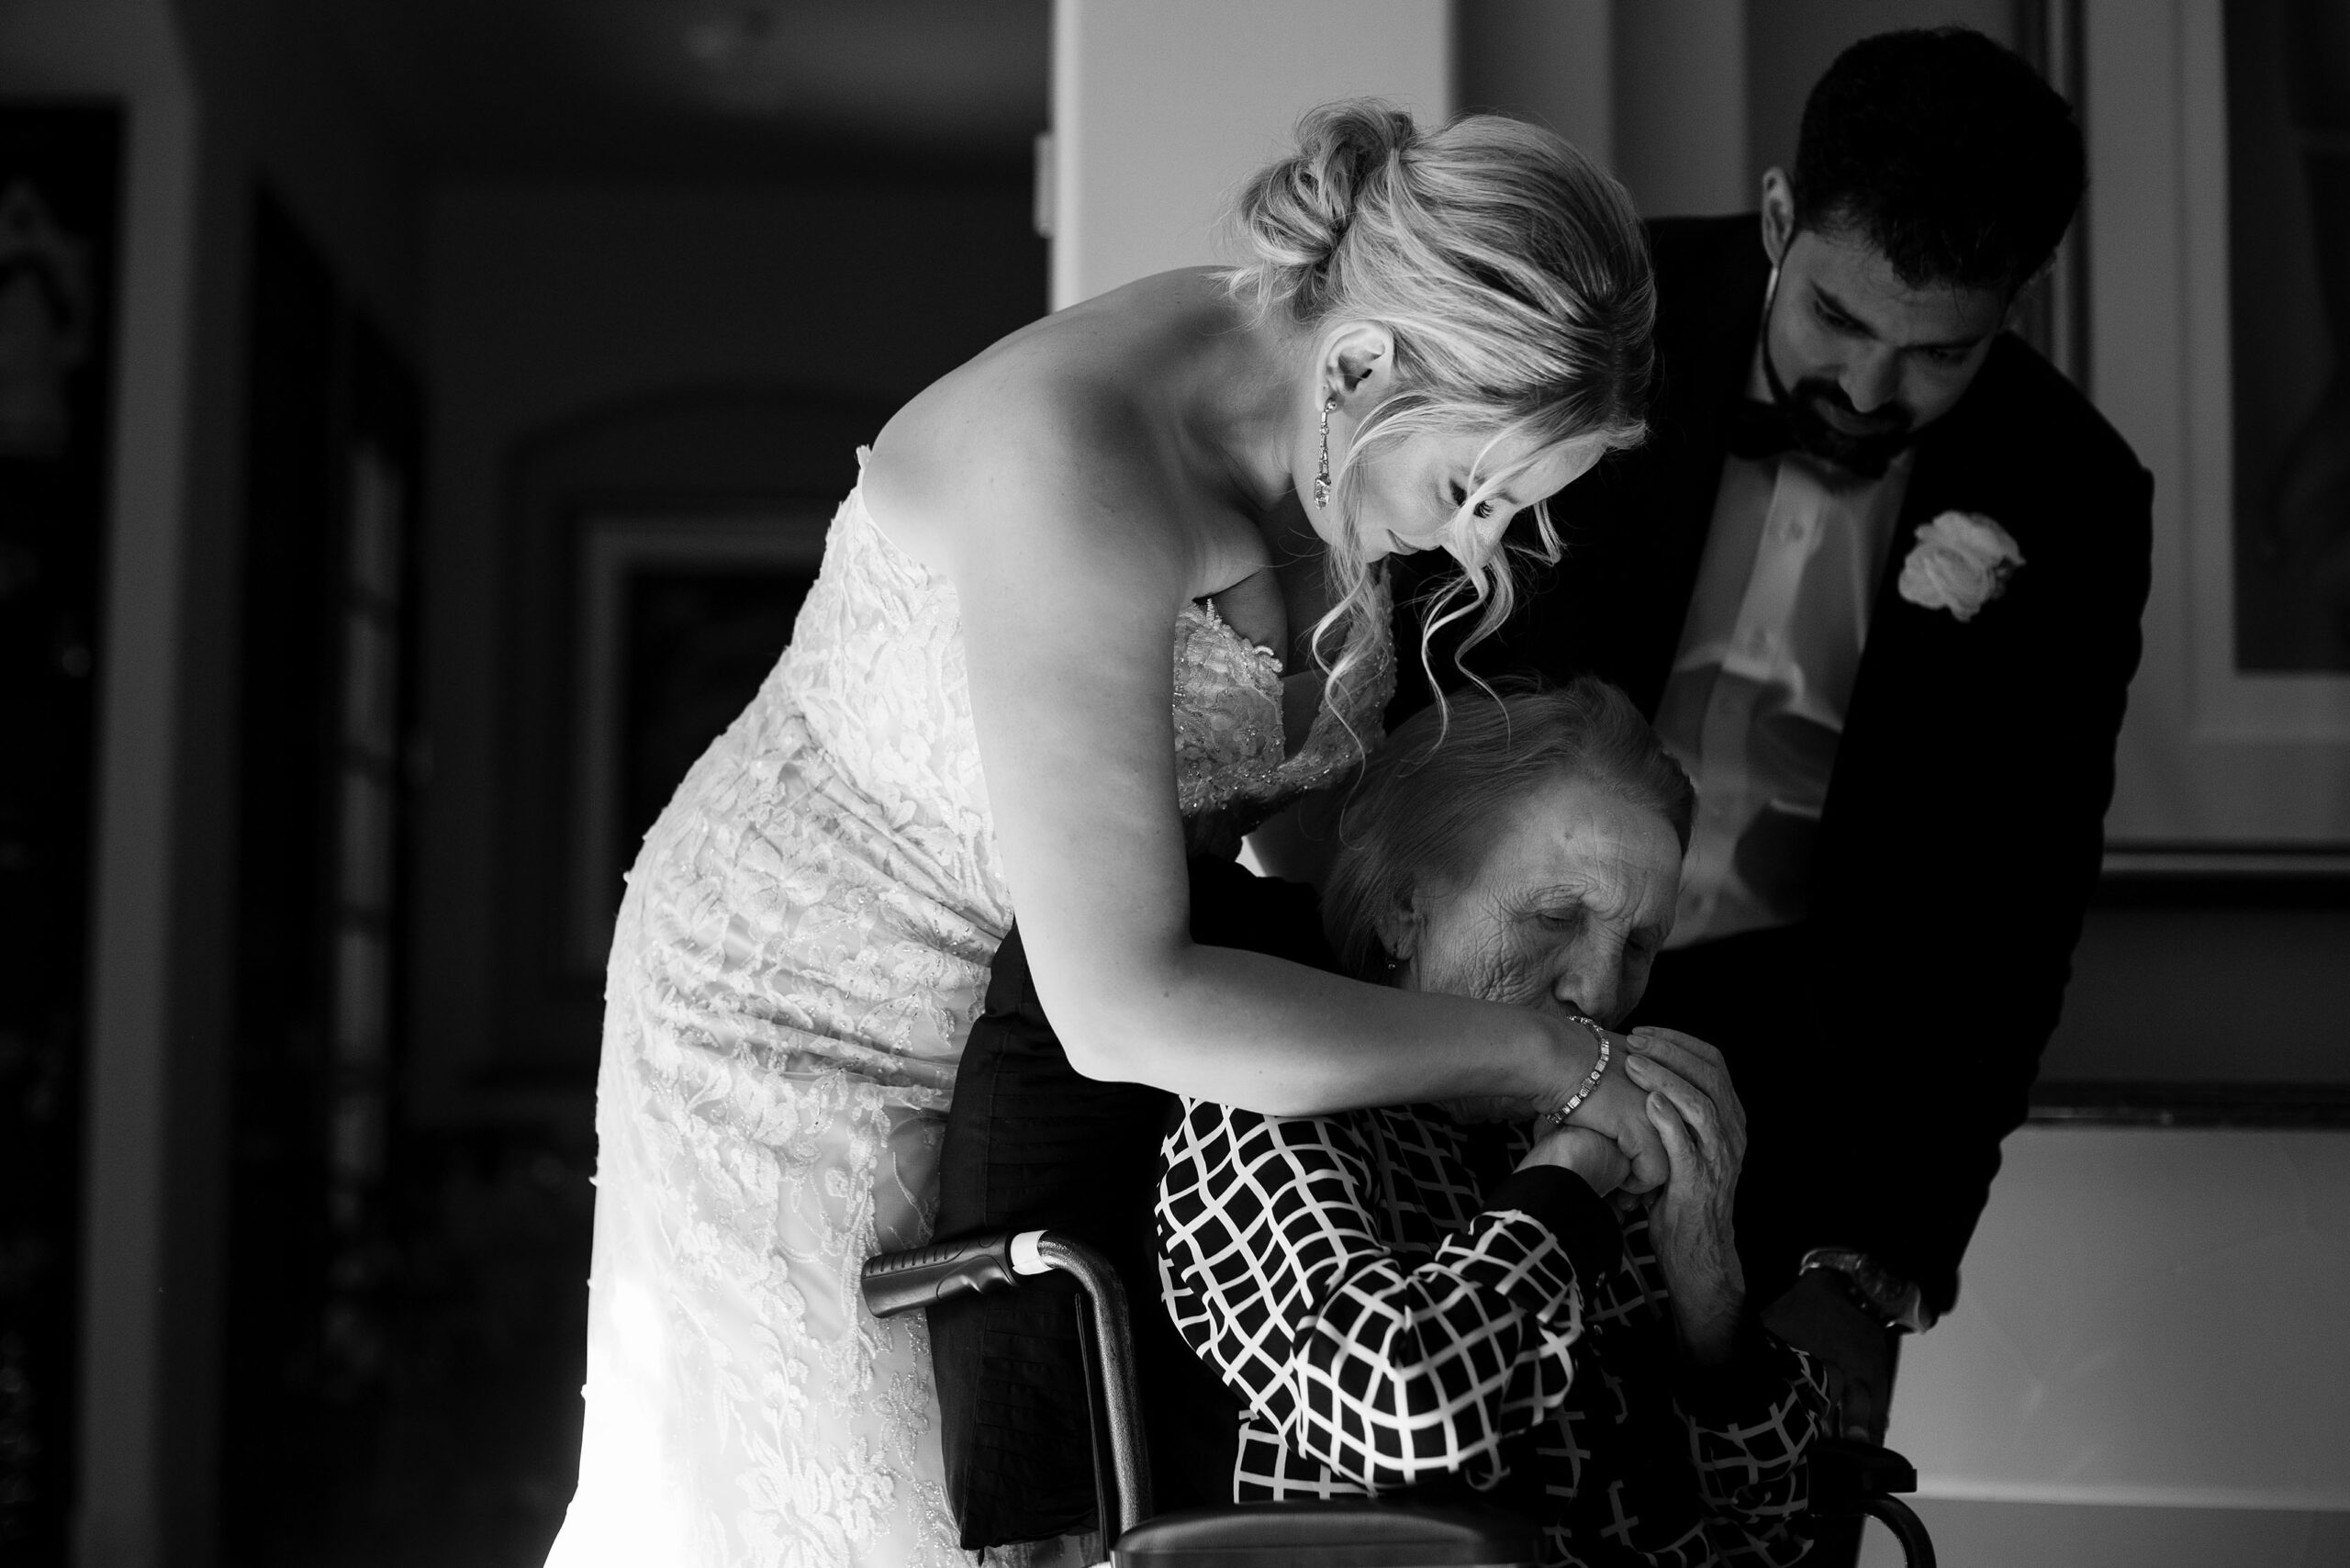 The bride receives a kiss on her hand from her grandmother as the groom looks on